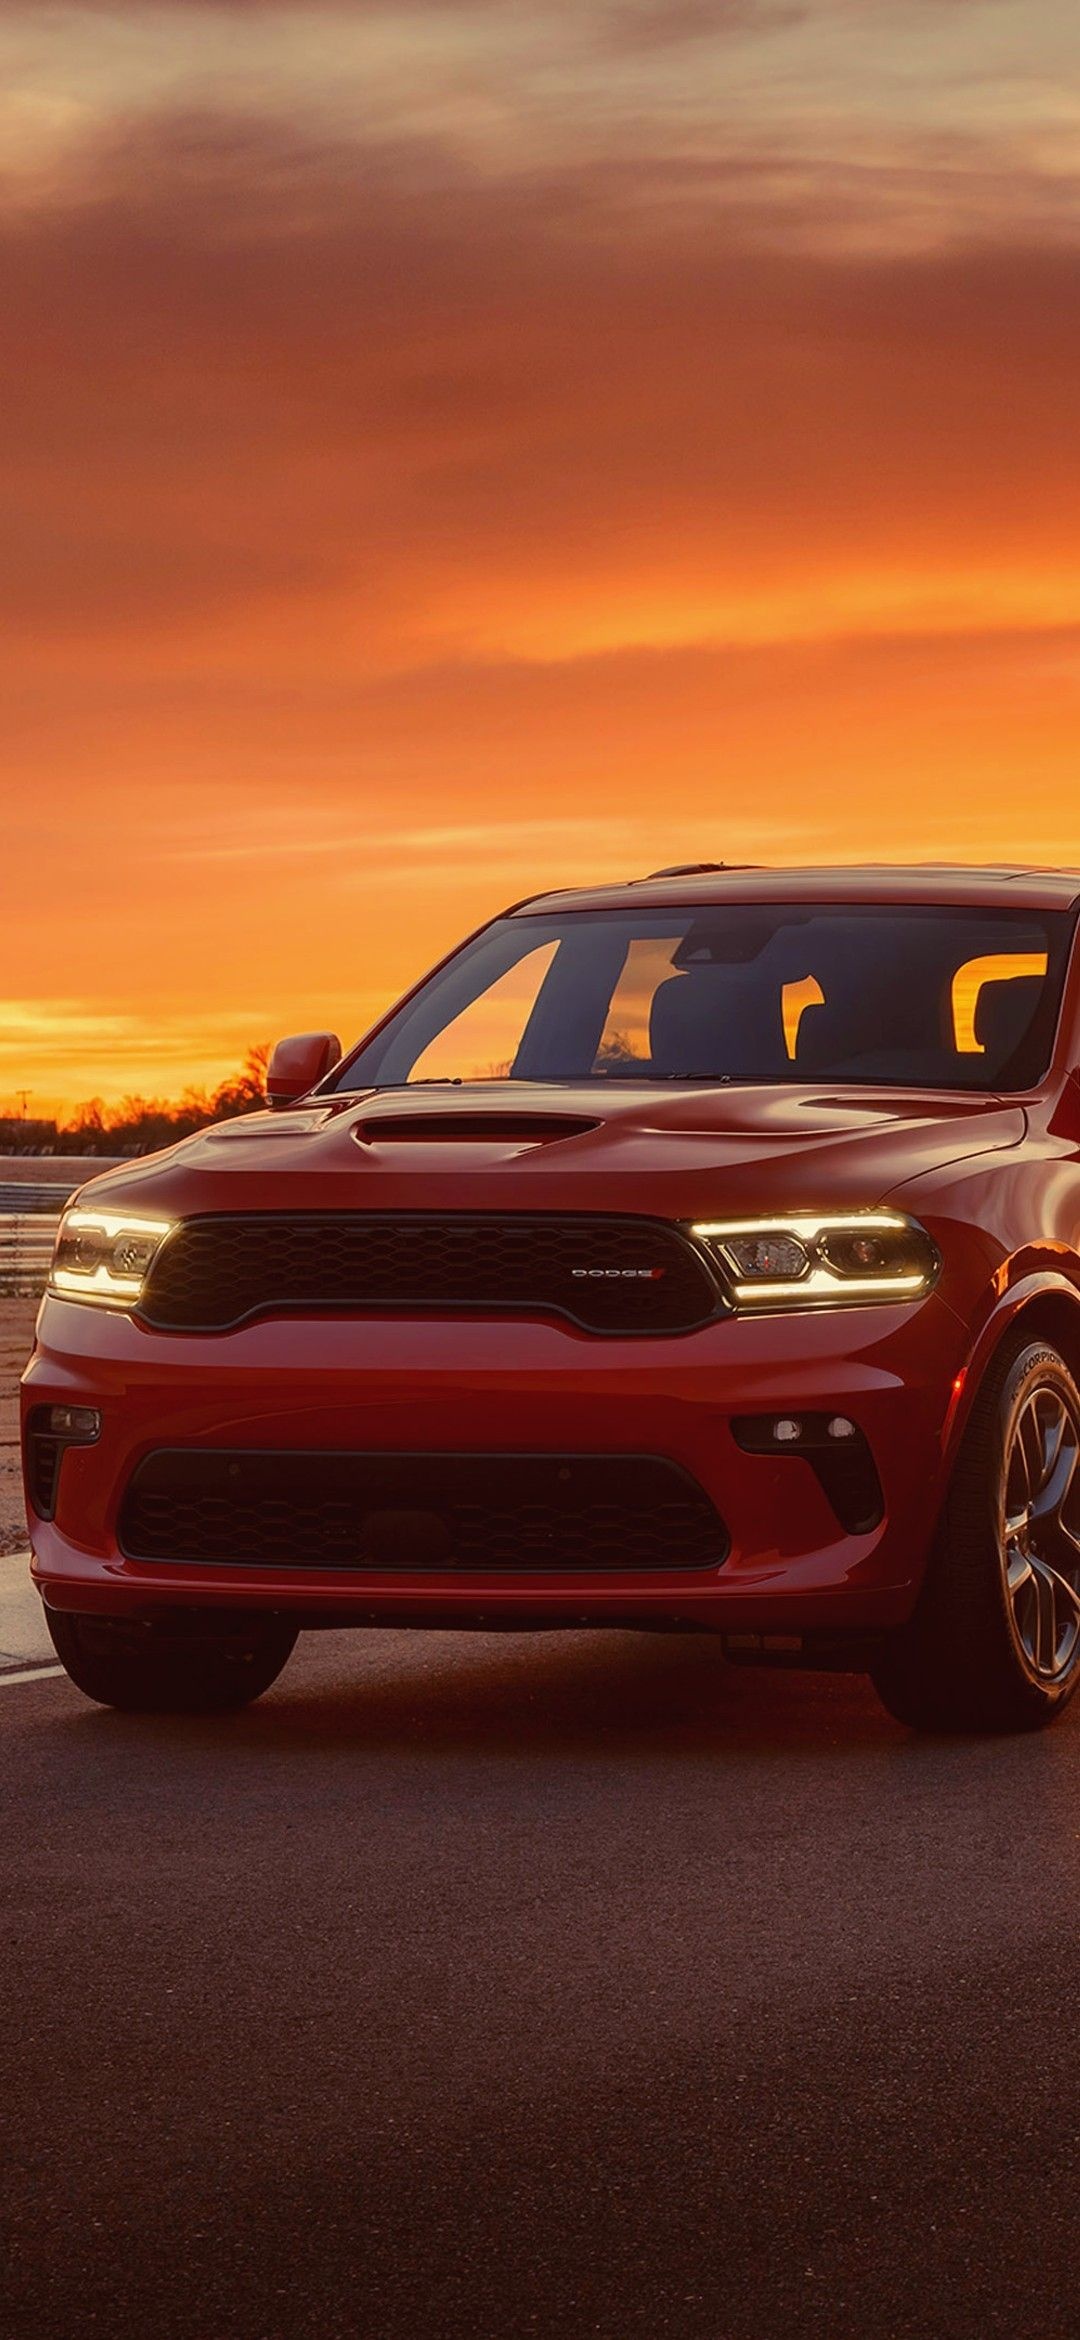 Dodge Durango, Mobile full HD wallpapers, Cool and stunning, Perfect for your device, 1080x2340 HD Phone